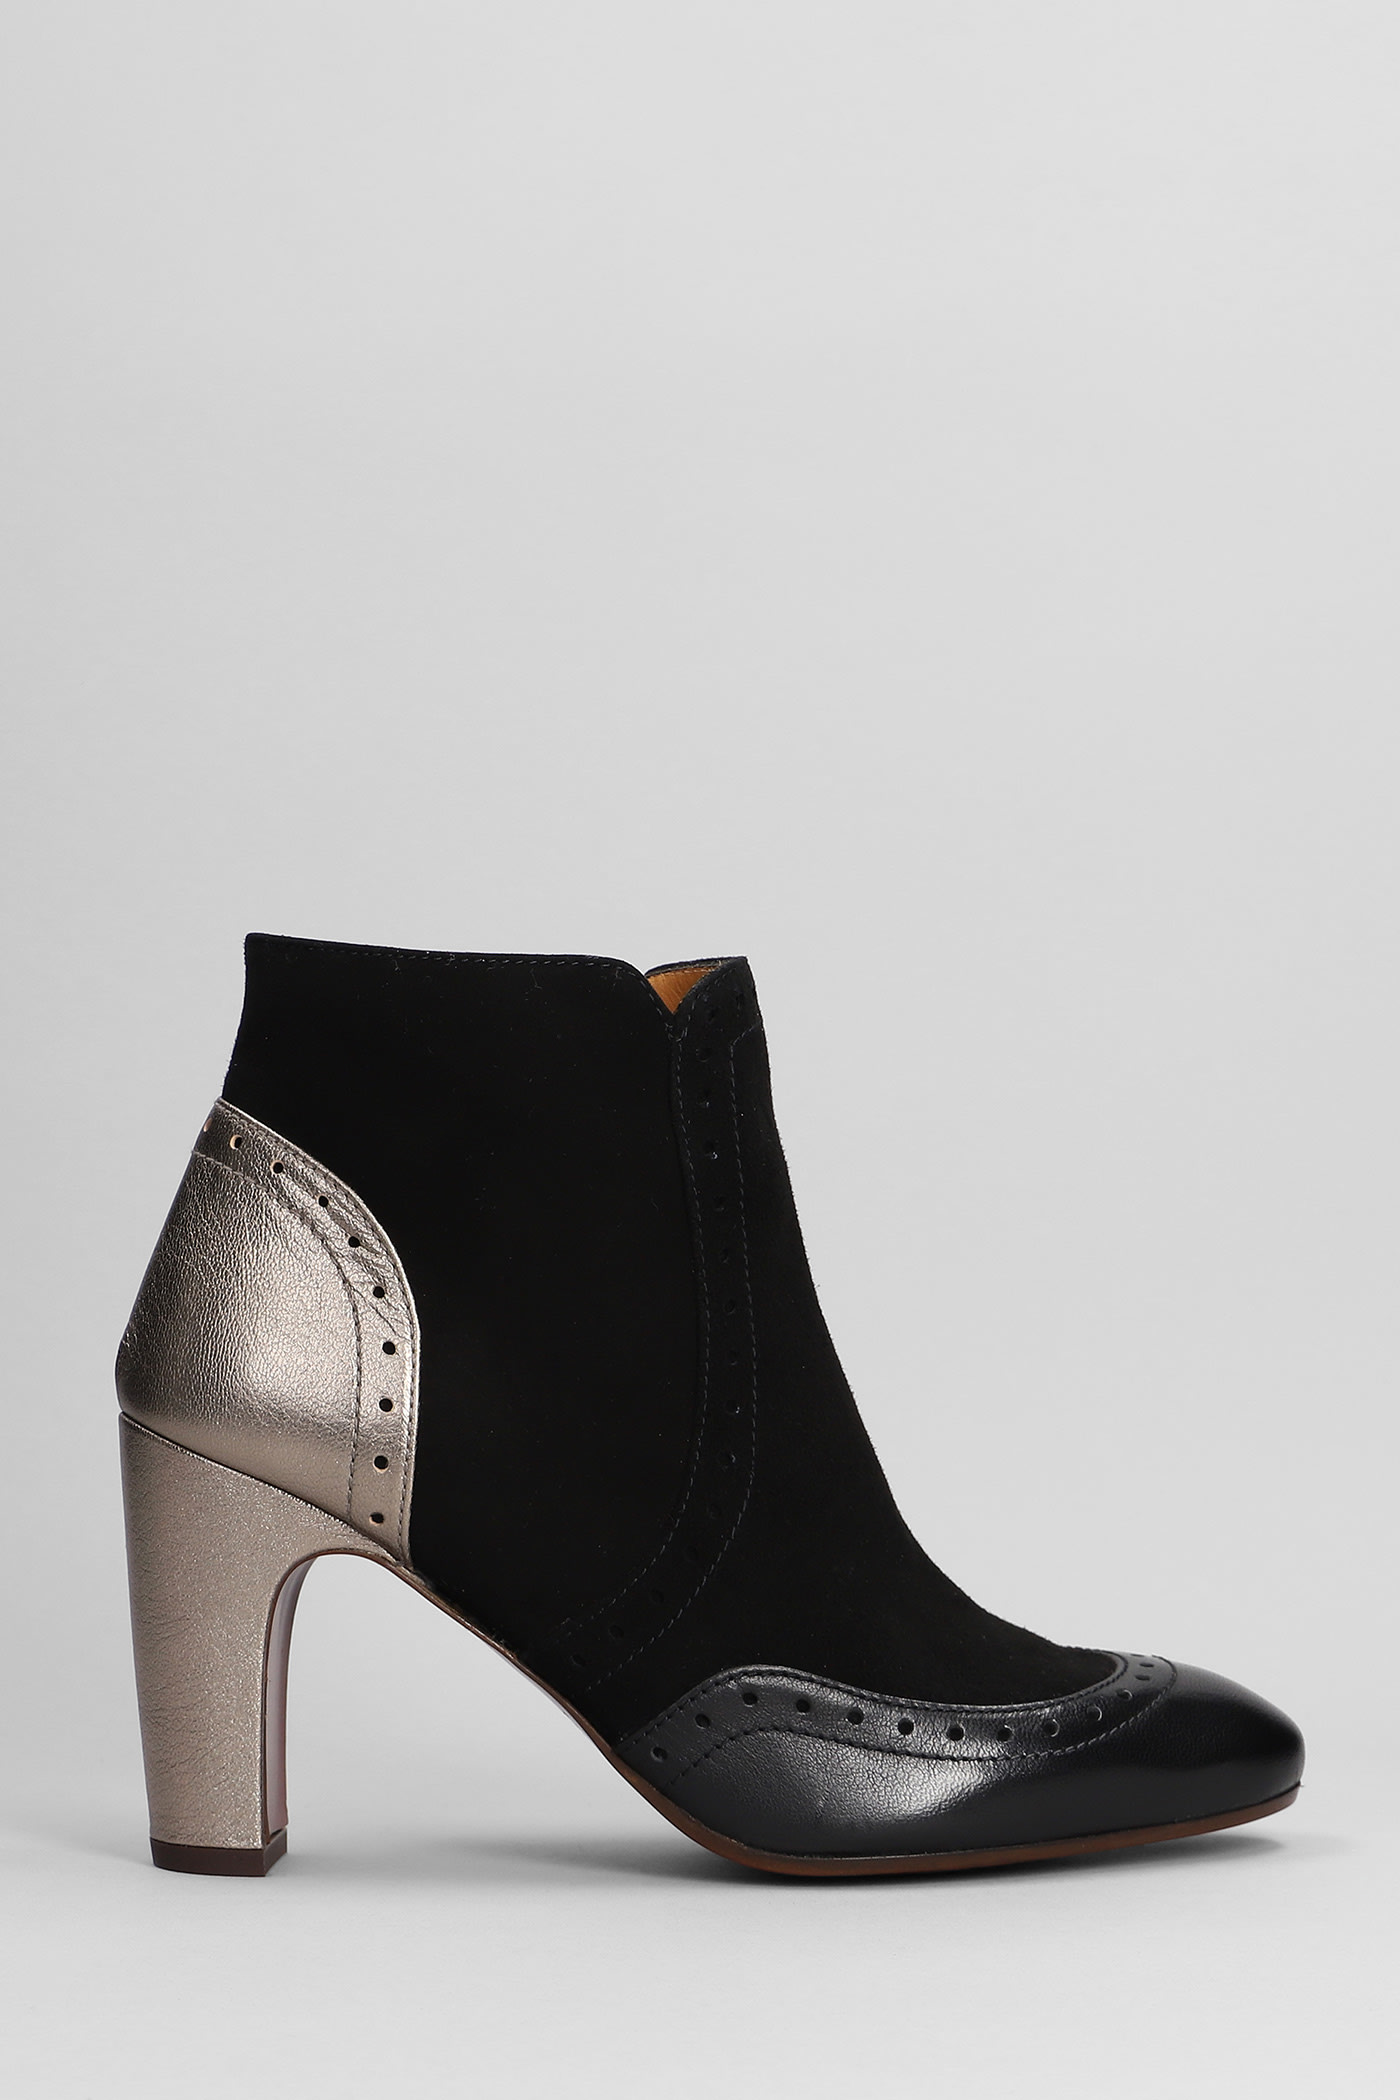 Eyarci High Heels Ankle Boots In Black Suede And Leather